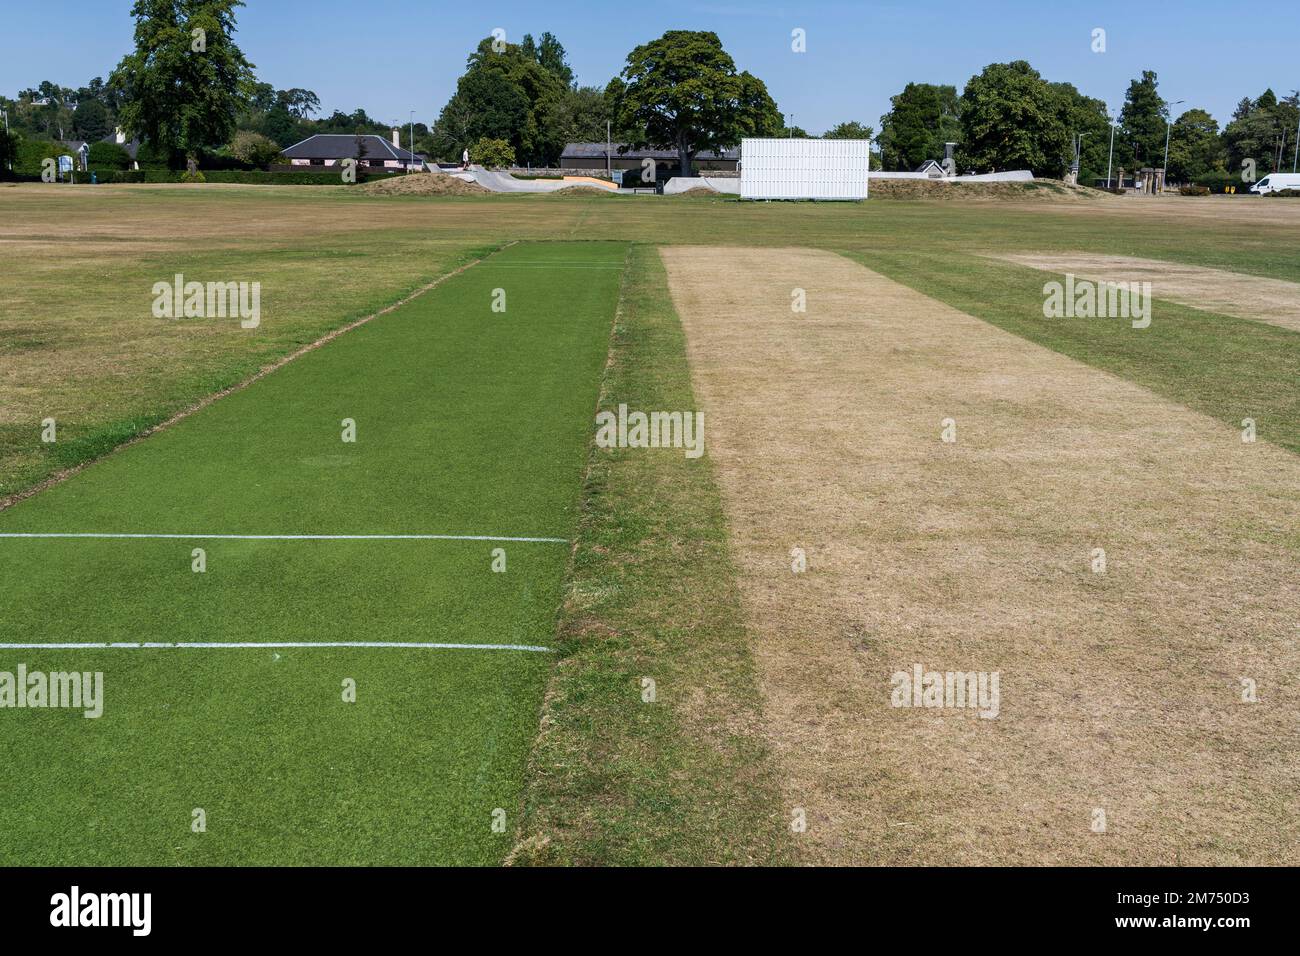 Drought hardened cricket pitch in August in Scotland with year-round artificial turf pitch alongside it Stock Photo